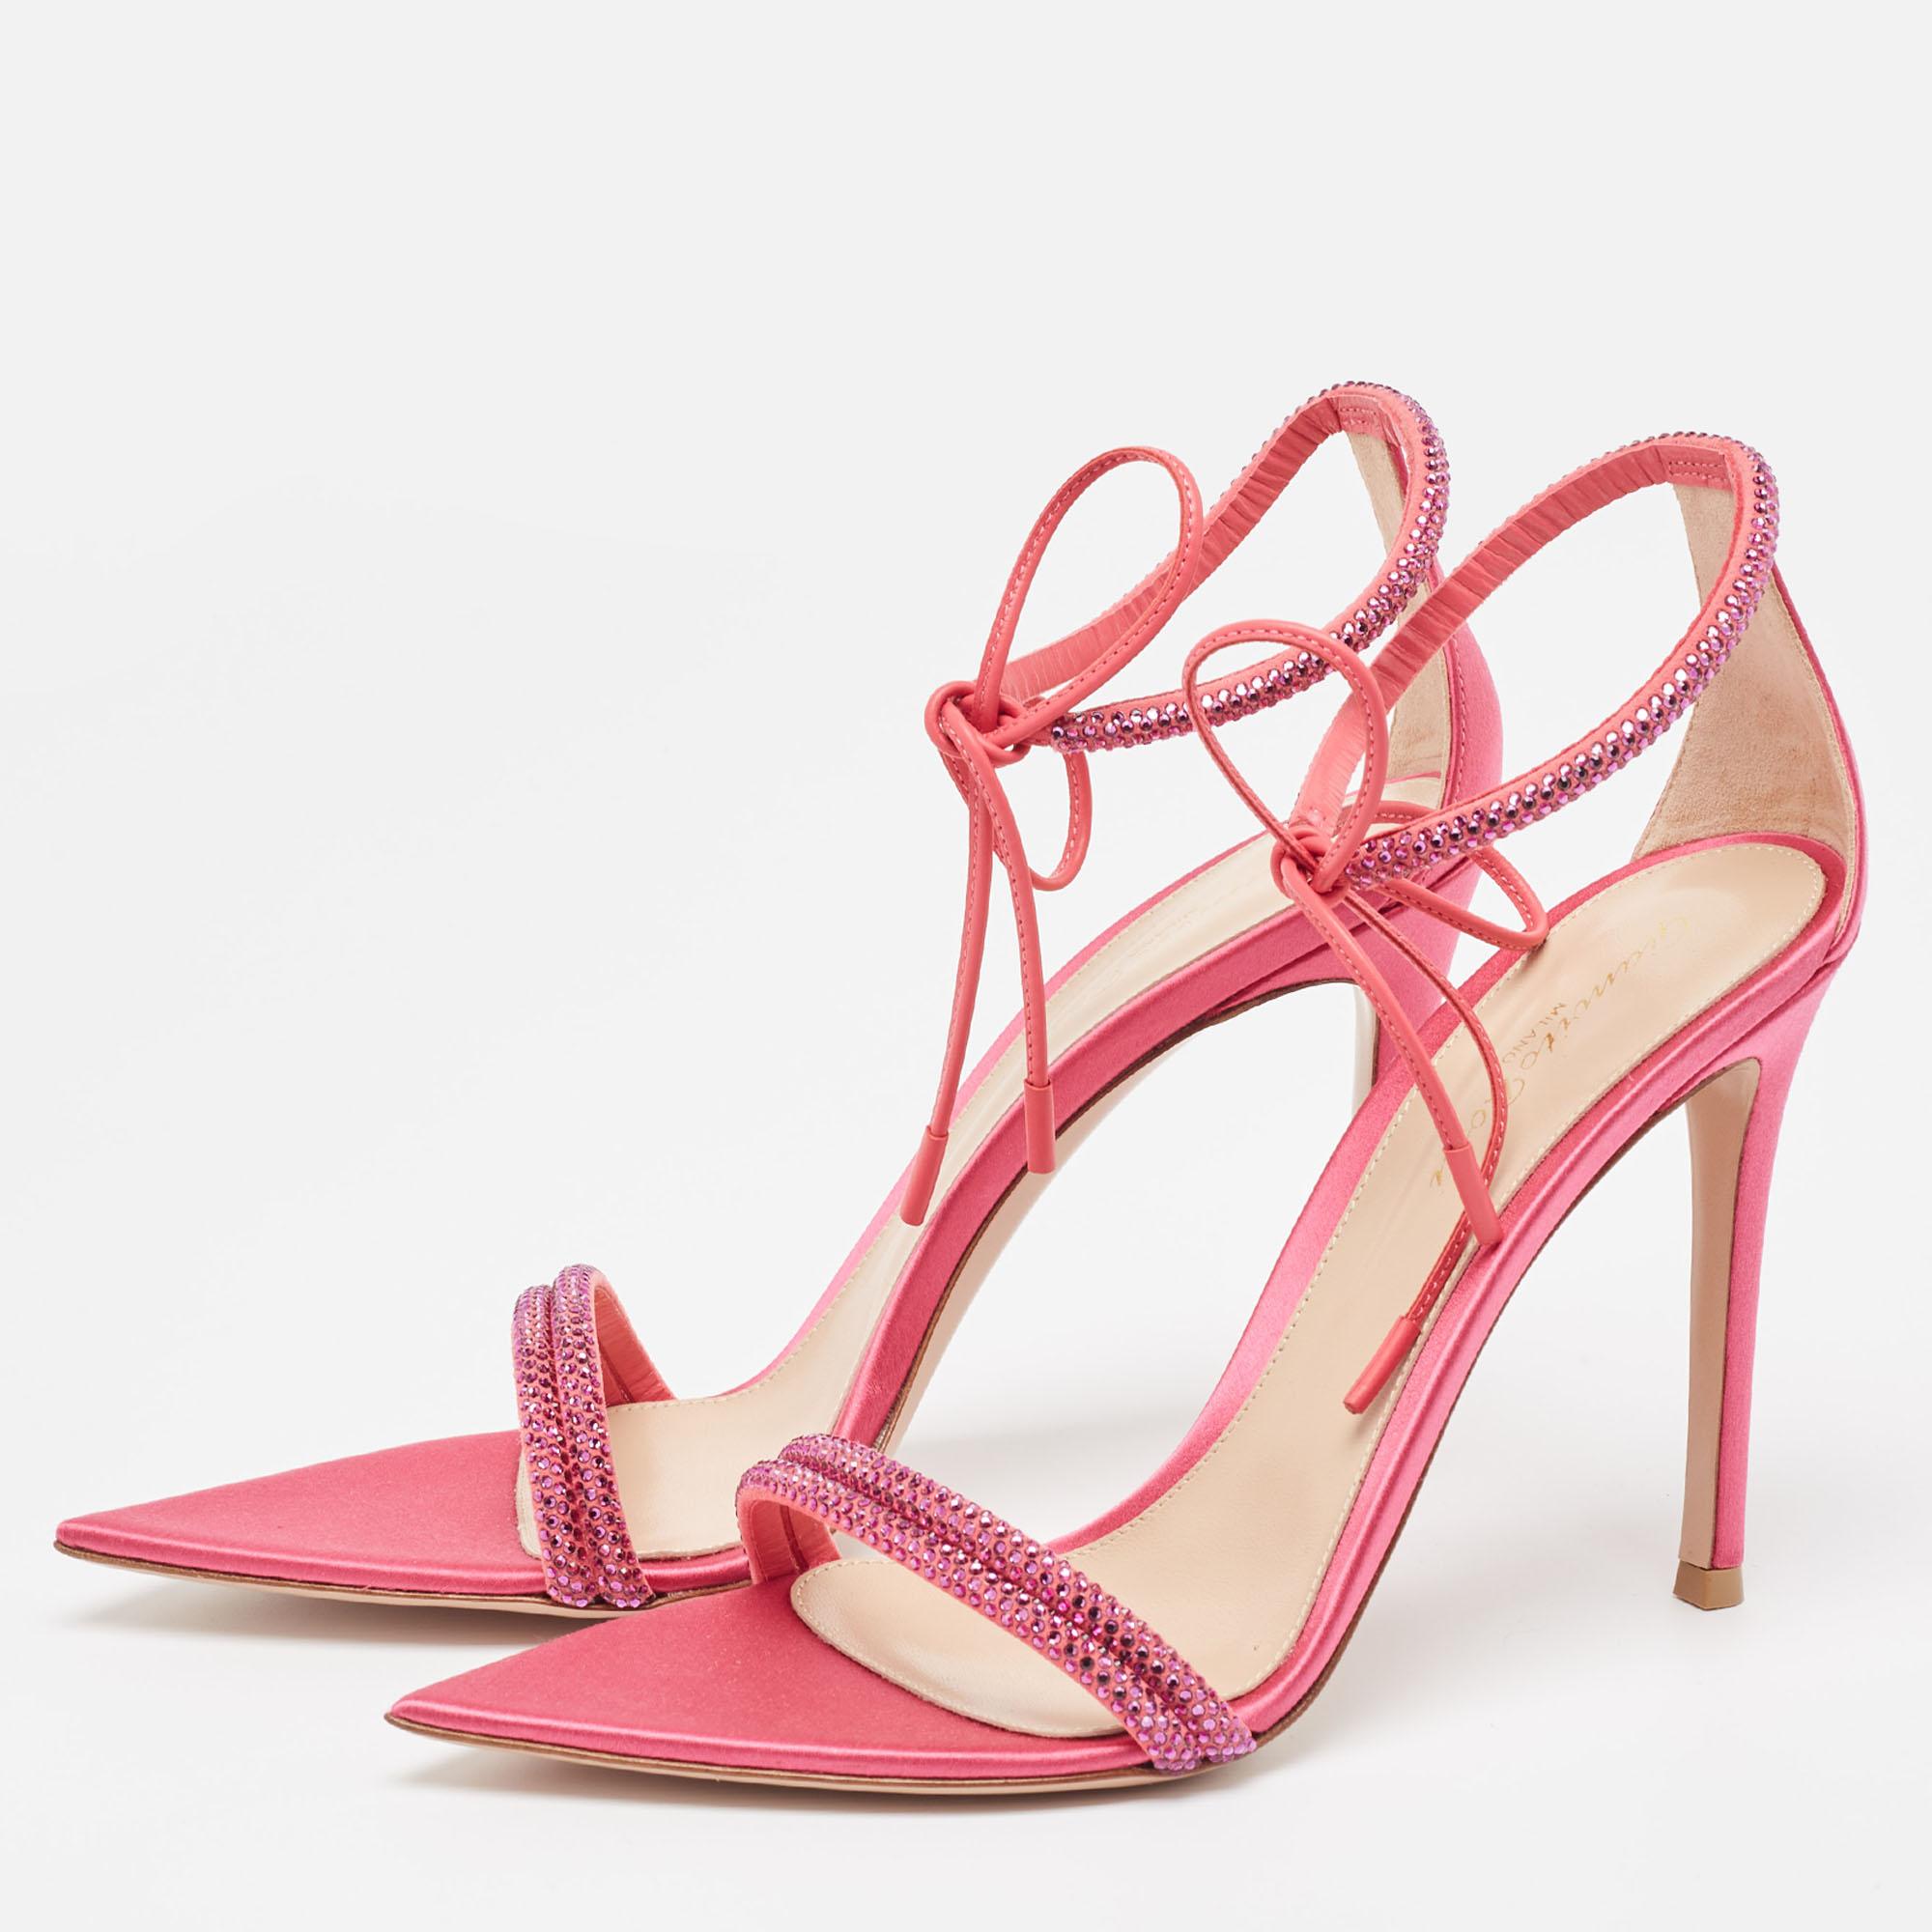 Gianvito Rossi Pink Satin Embellished Montecarlo Sandals Size 39 For Sale 4